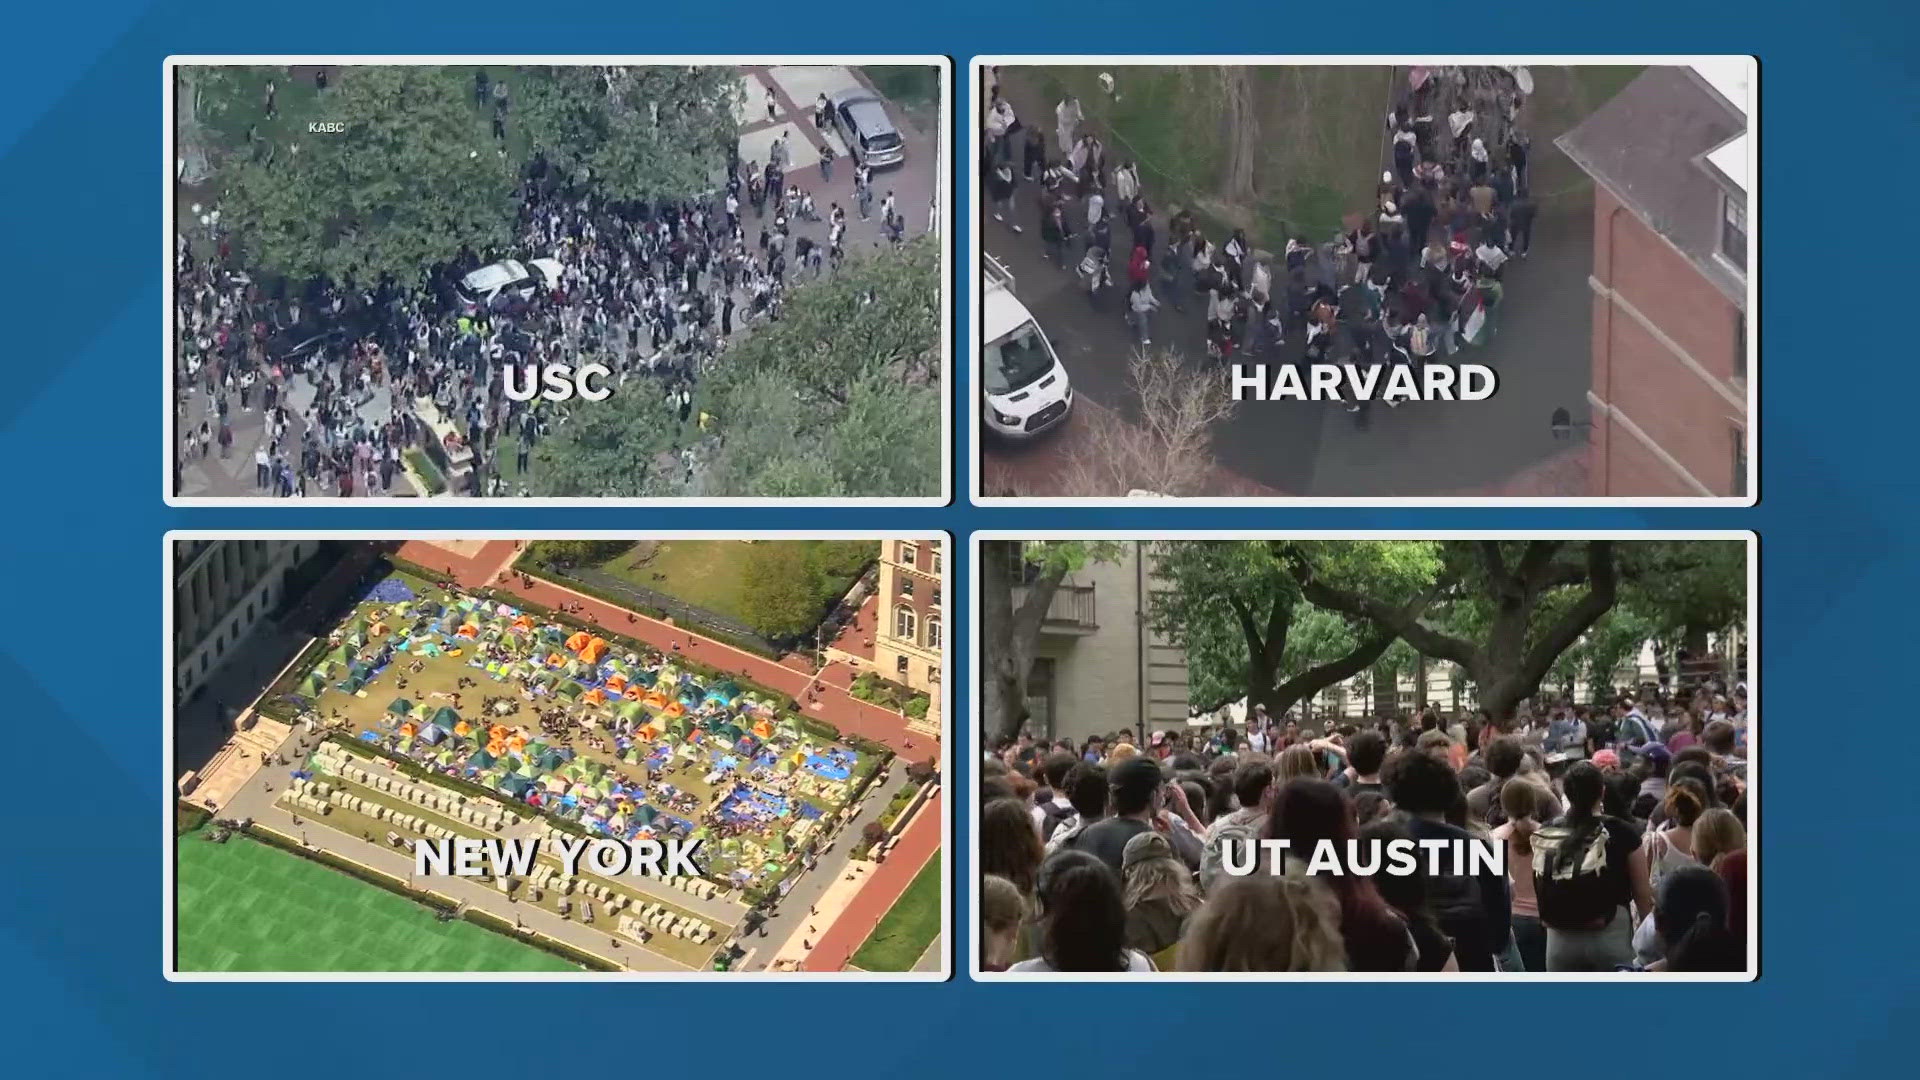 Massive protests on college campuses across the country calling for the end of US support for Israel.